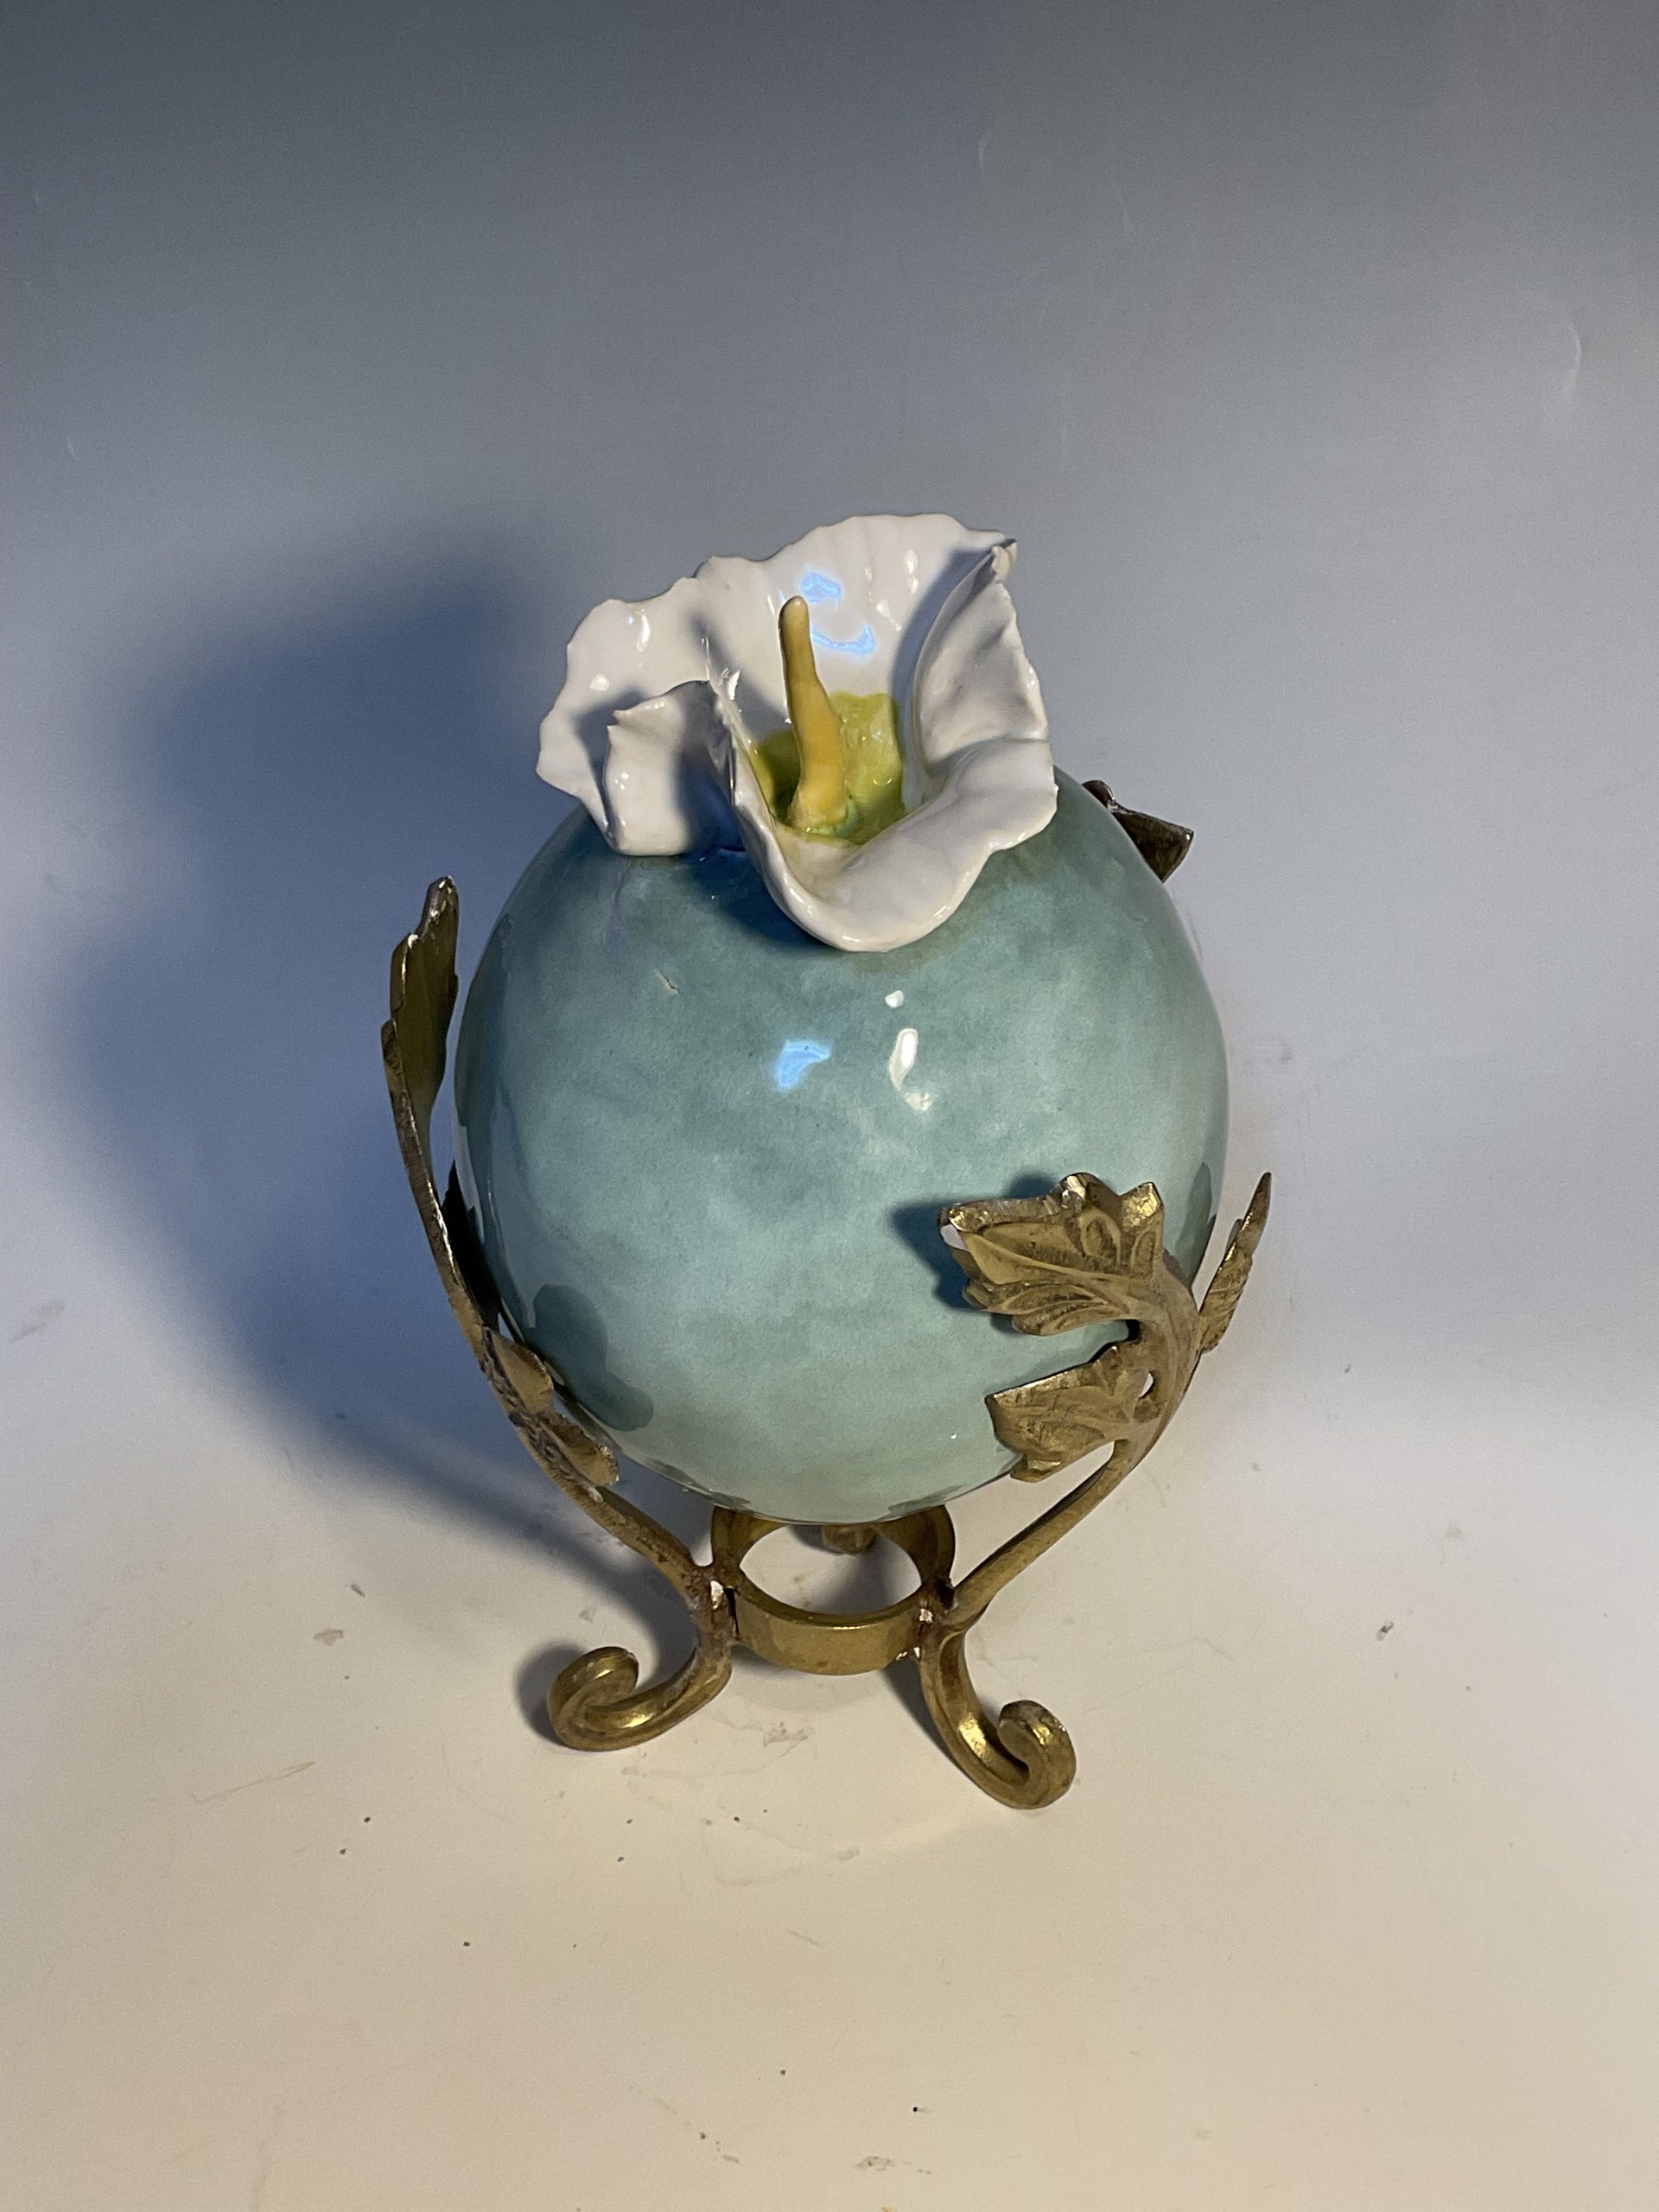 Flower Bulb w/ Stand by Anna M. Elrod